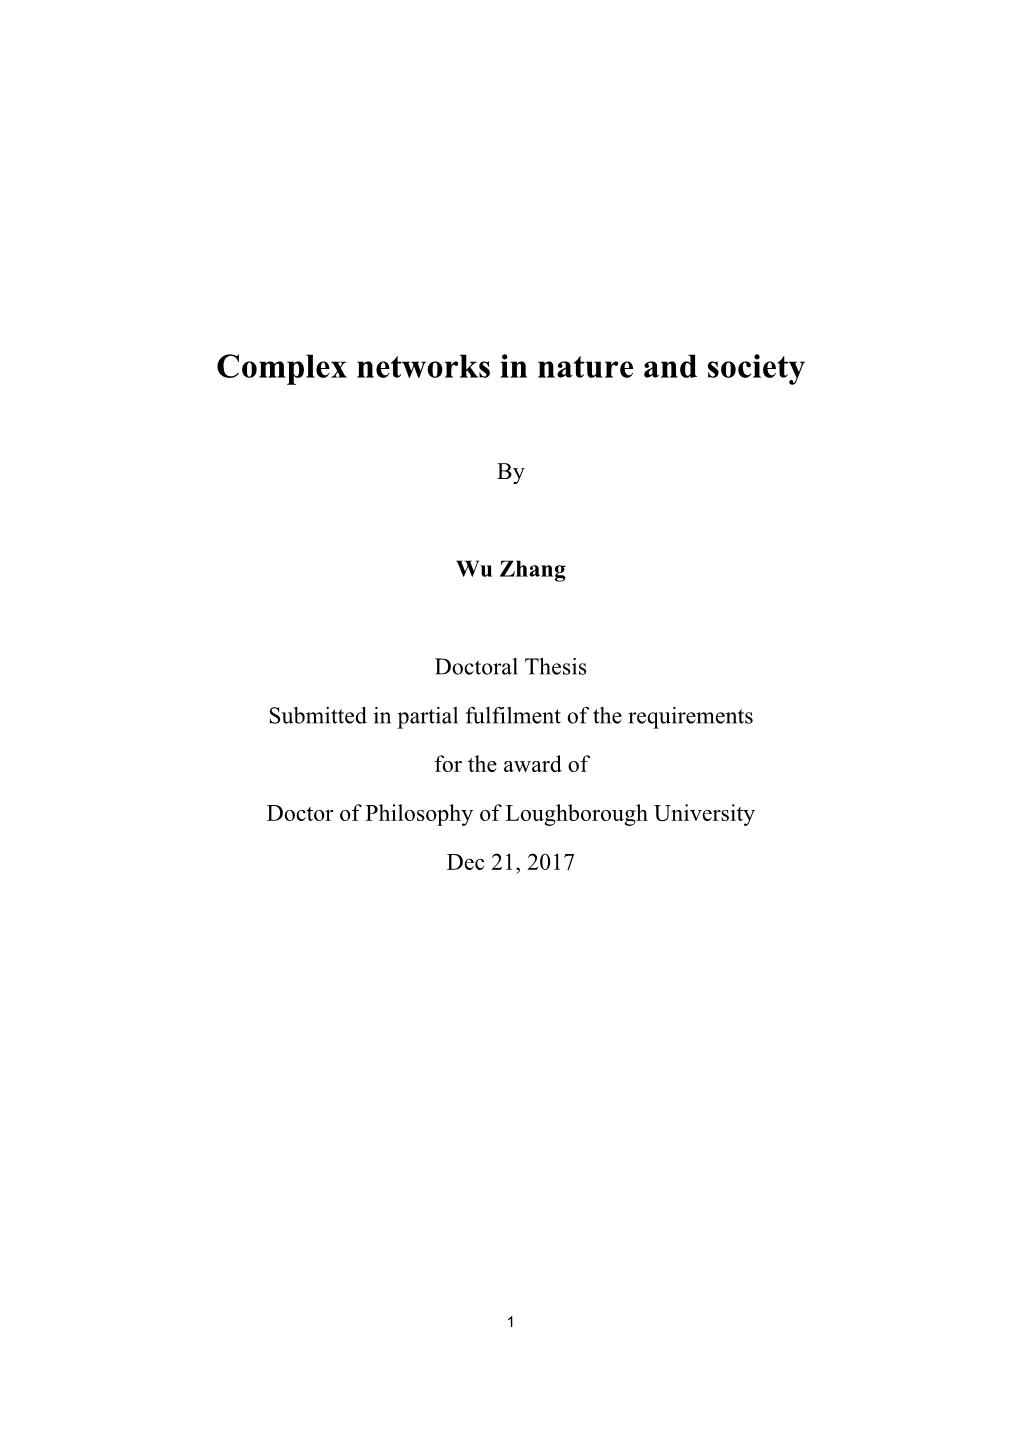 Complex Networks in Nature and Society